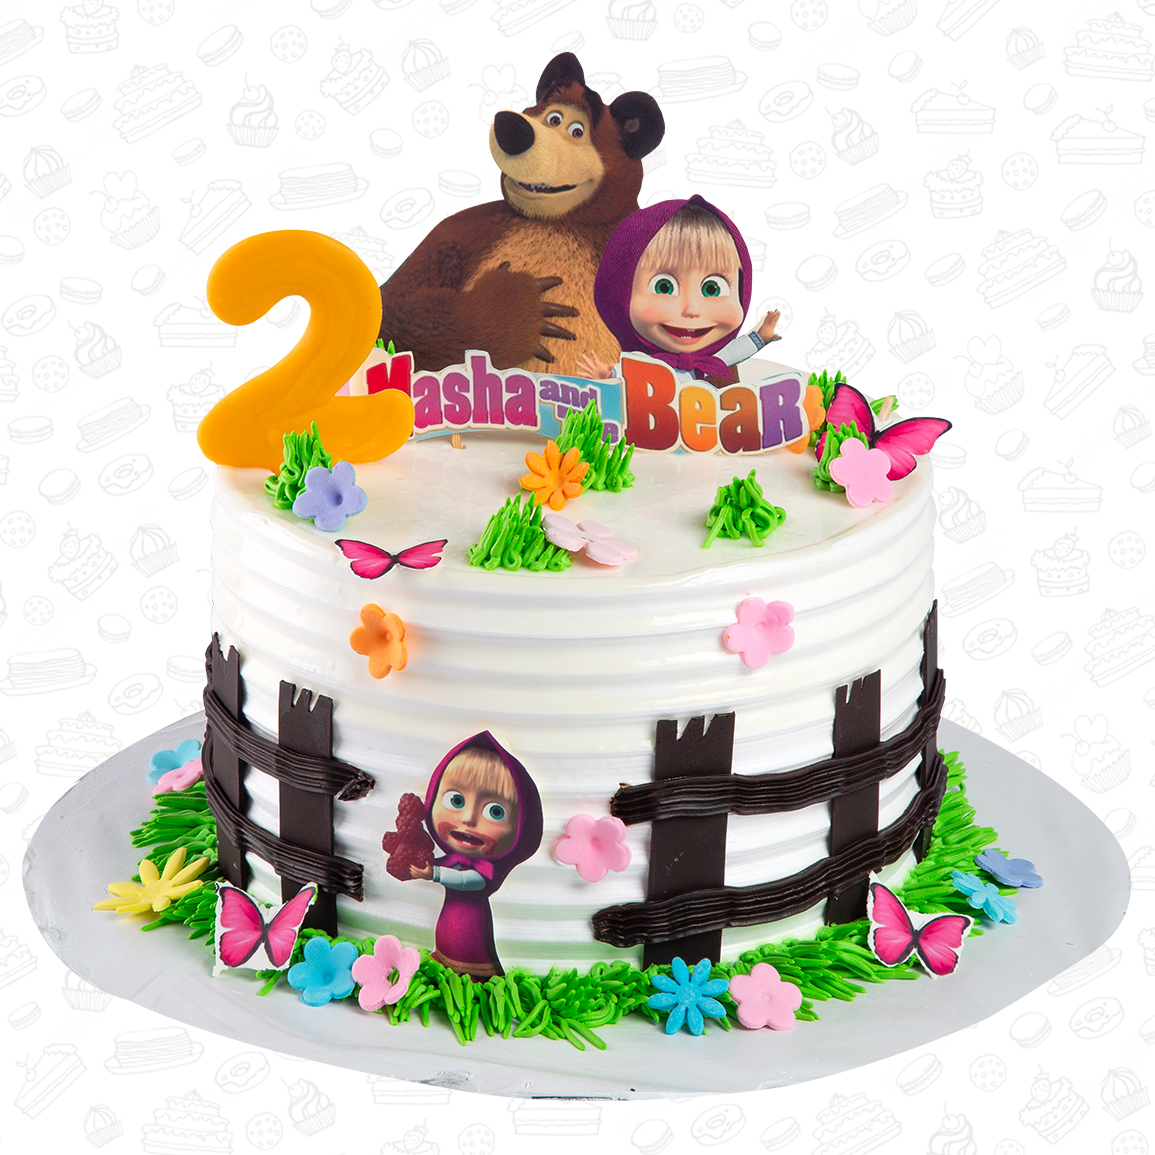 Homebaker - Another Masha and the bear theme cake. | Facebook